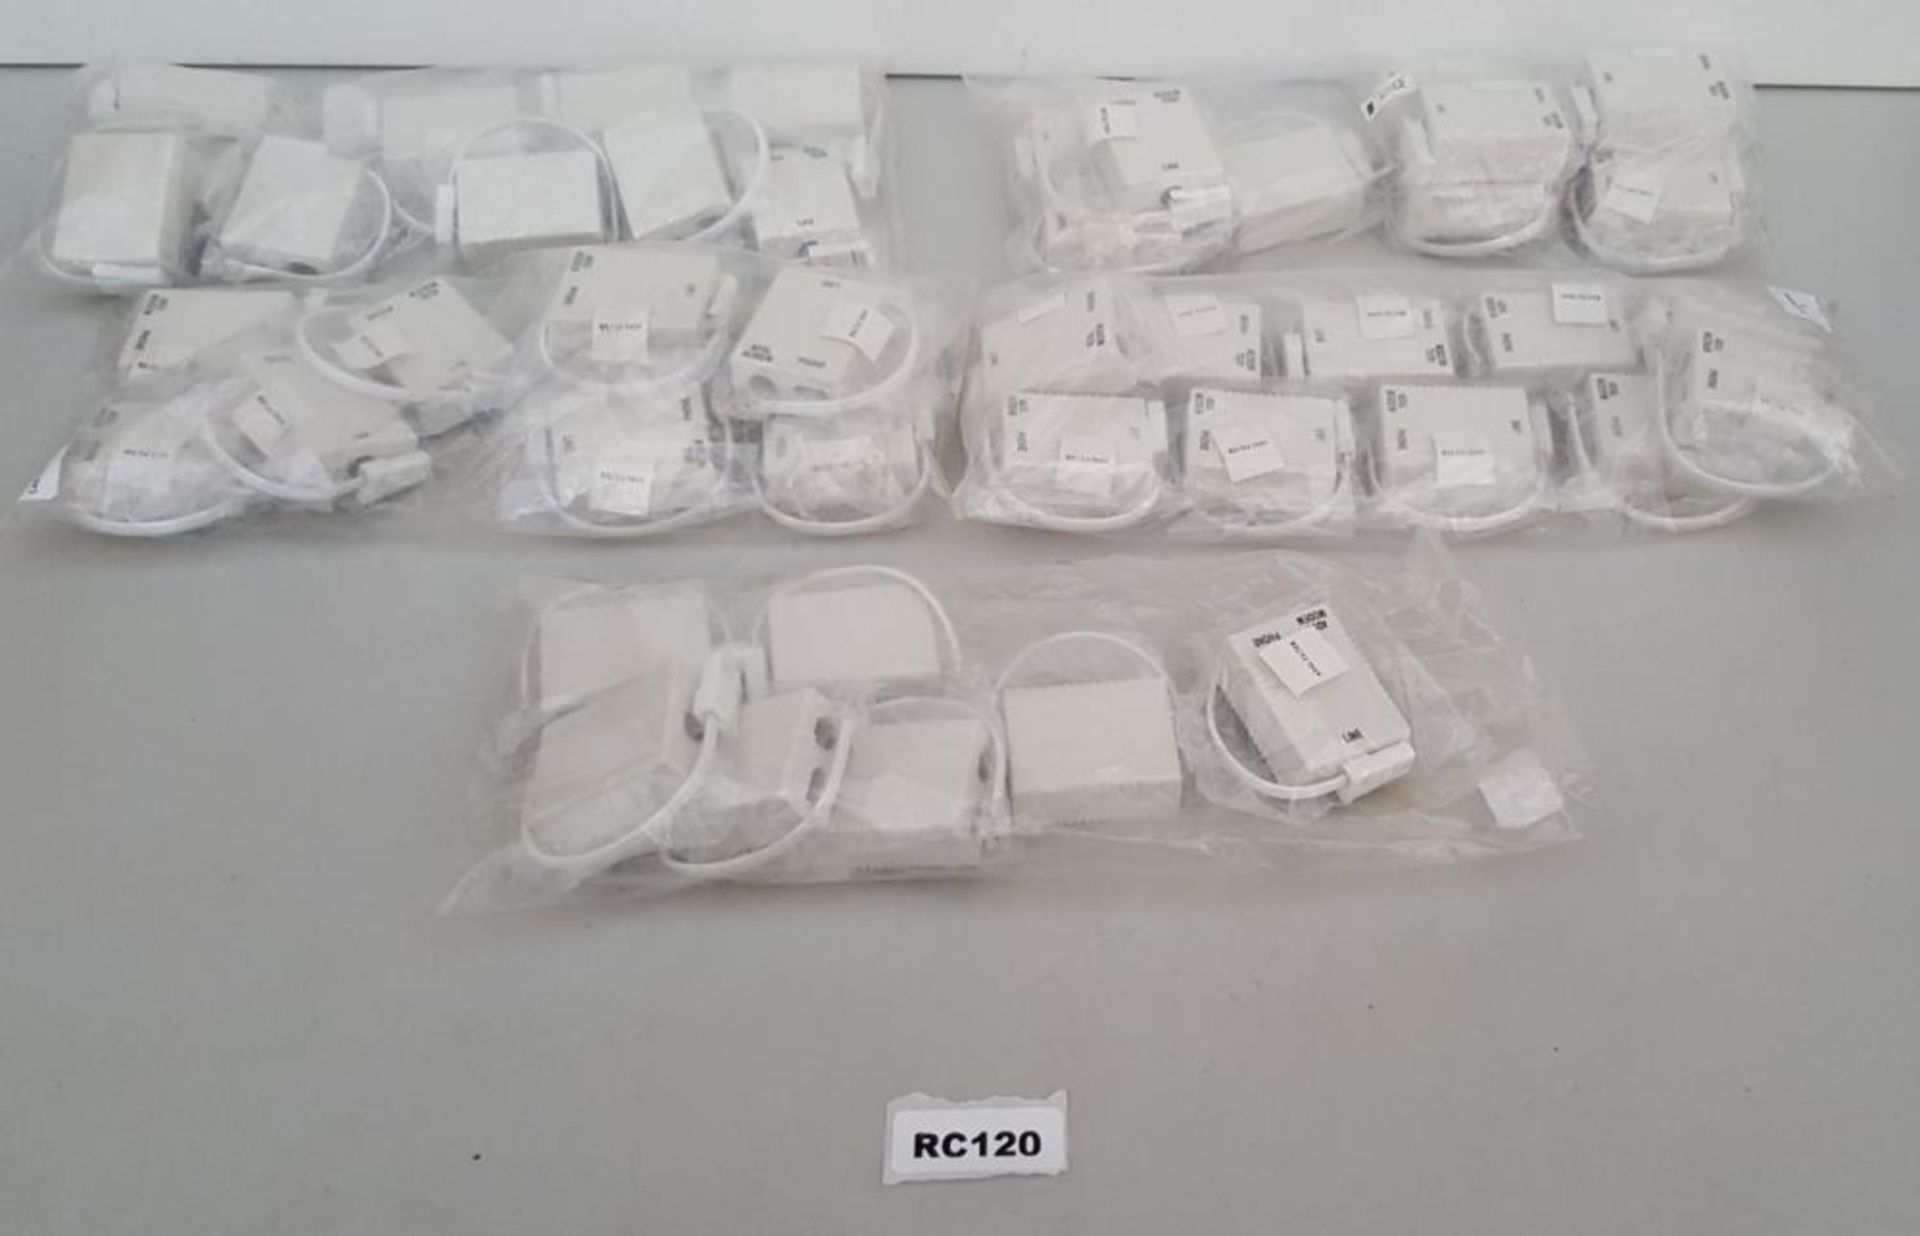 45 x ADSL Filters - Ref RC120 - CL011 - Location: Altrincham WA14 As per our terms and conditions